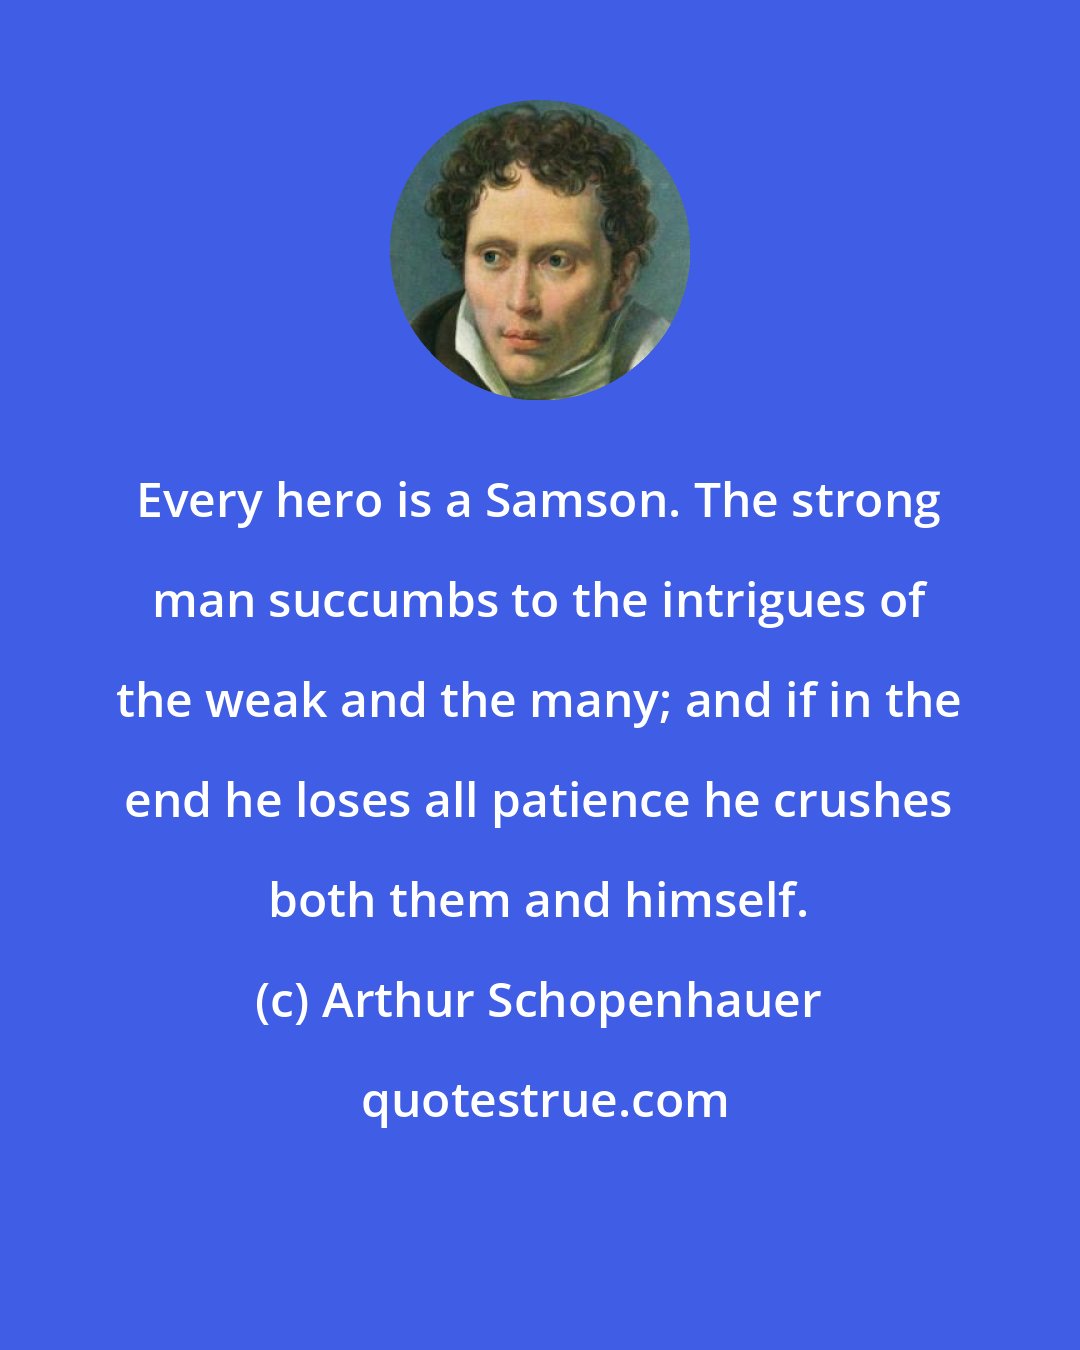 Arthur Schopenhauer: Every hero is a Samson. The strong man succumbs to the intrigues of the weak and the many; and if in the end he loses all patience he crushes both them and himself.